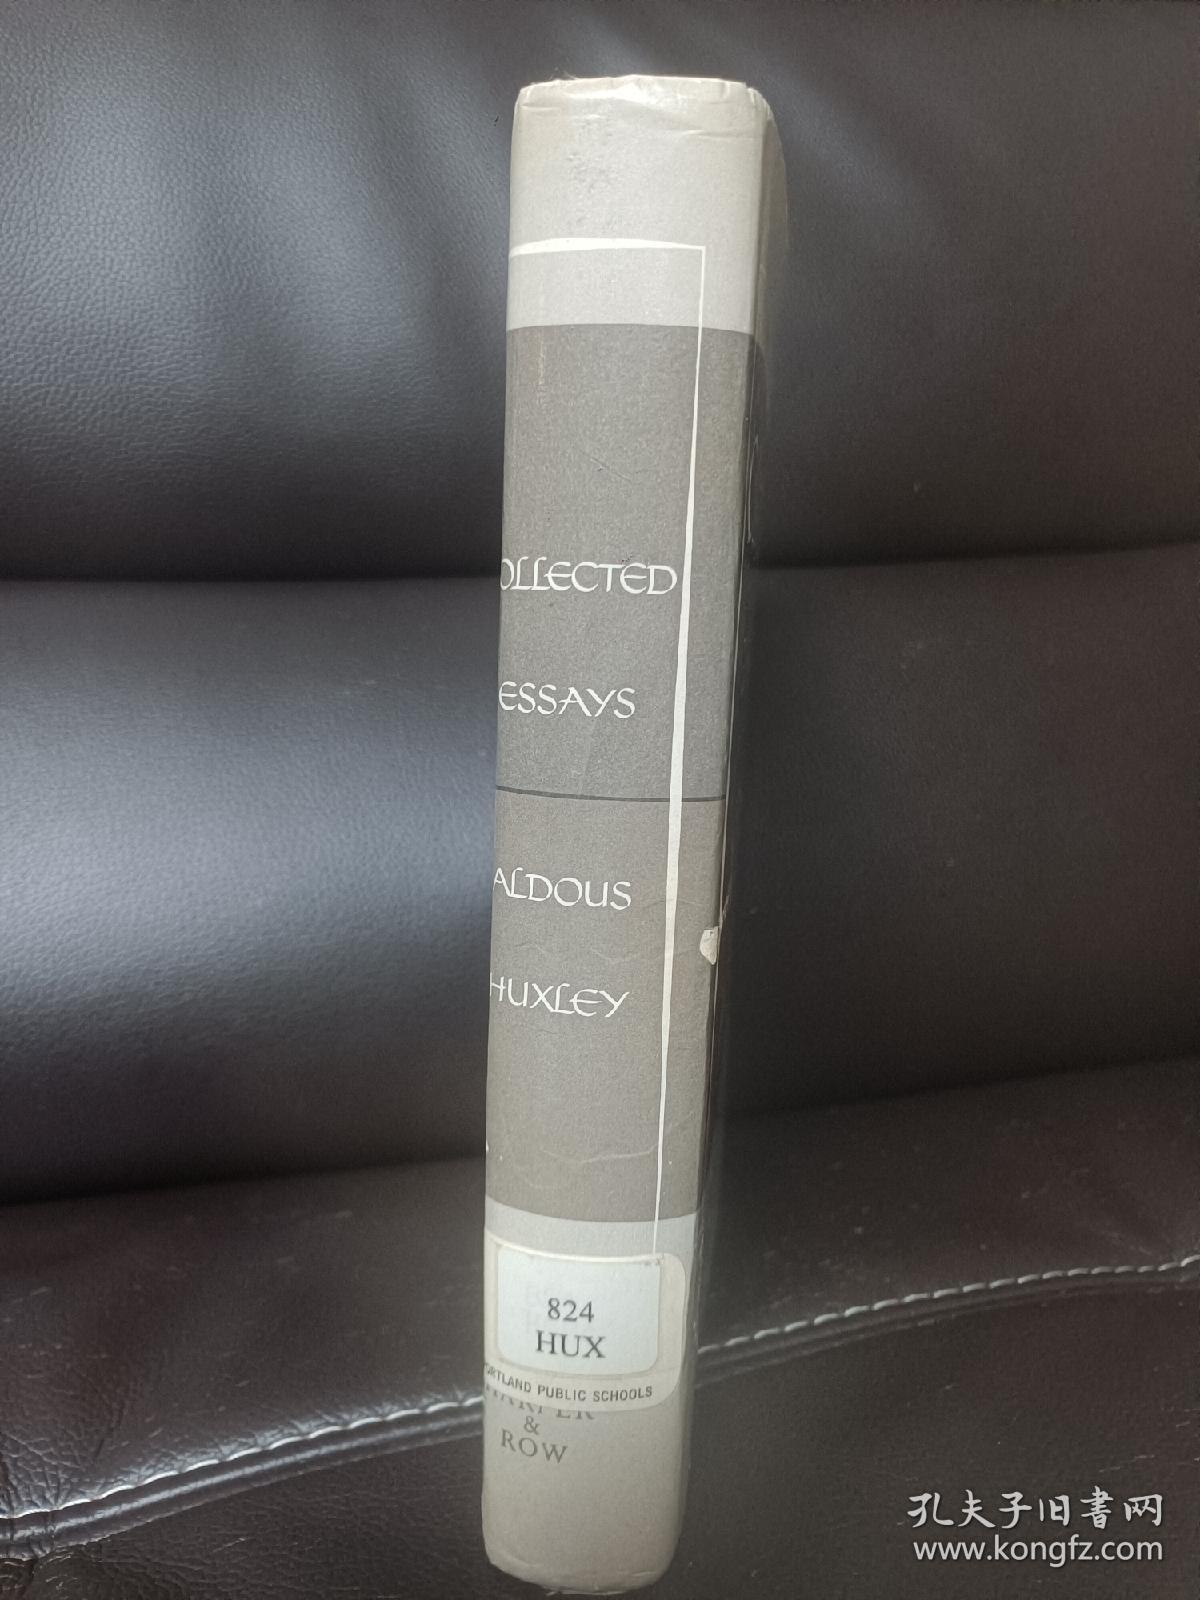 Collected essays of Aldous Huxley